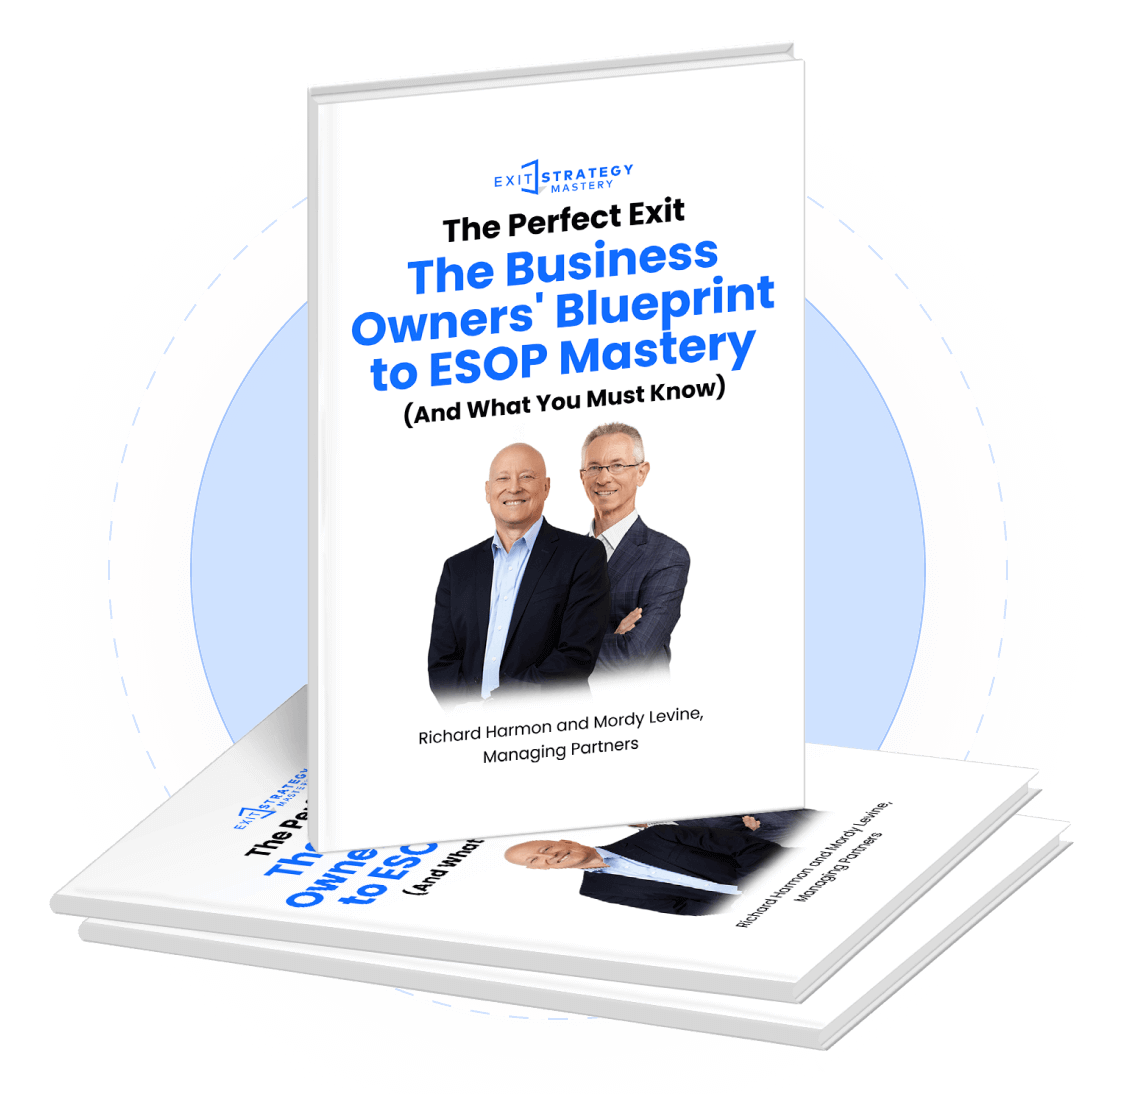 The-Perfect-Exit-The-Business-Owners'-Blueprint-to-ESOP-Mastery